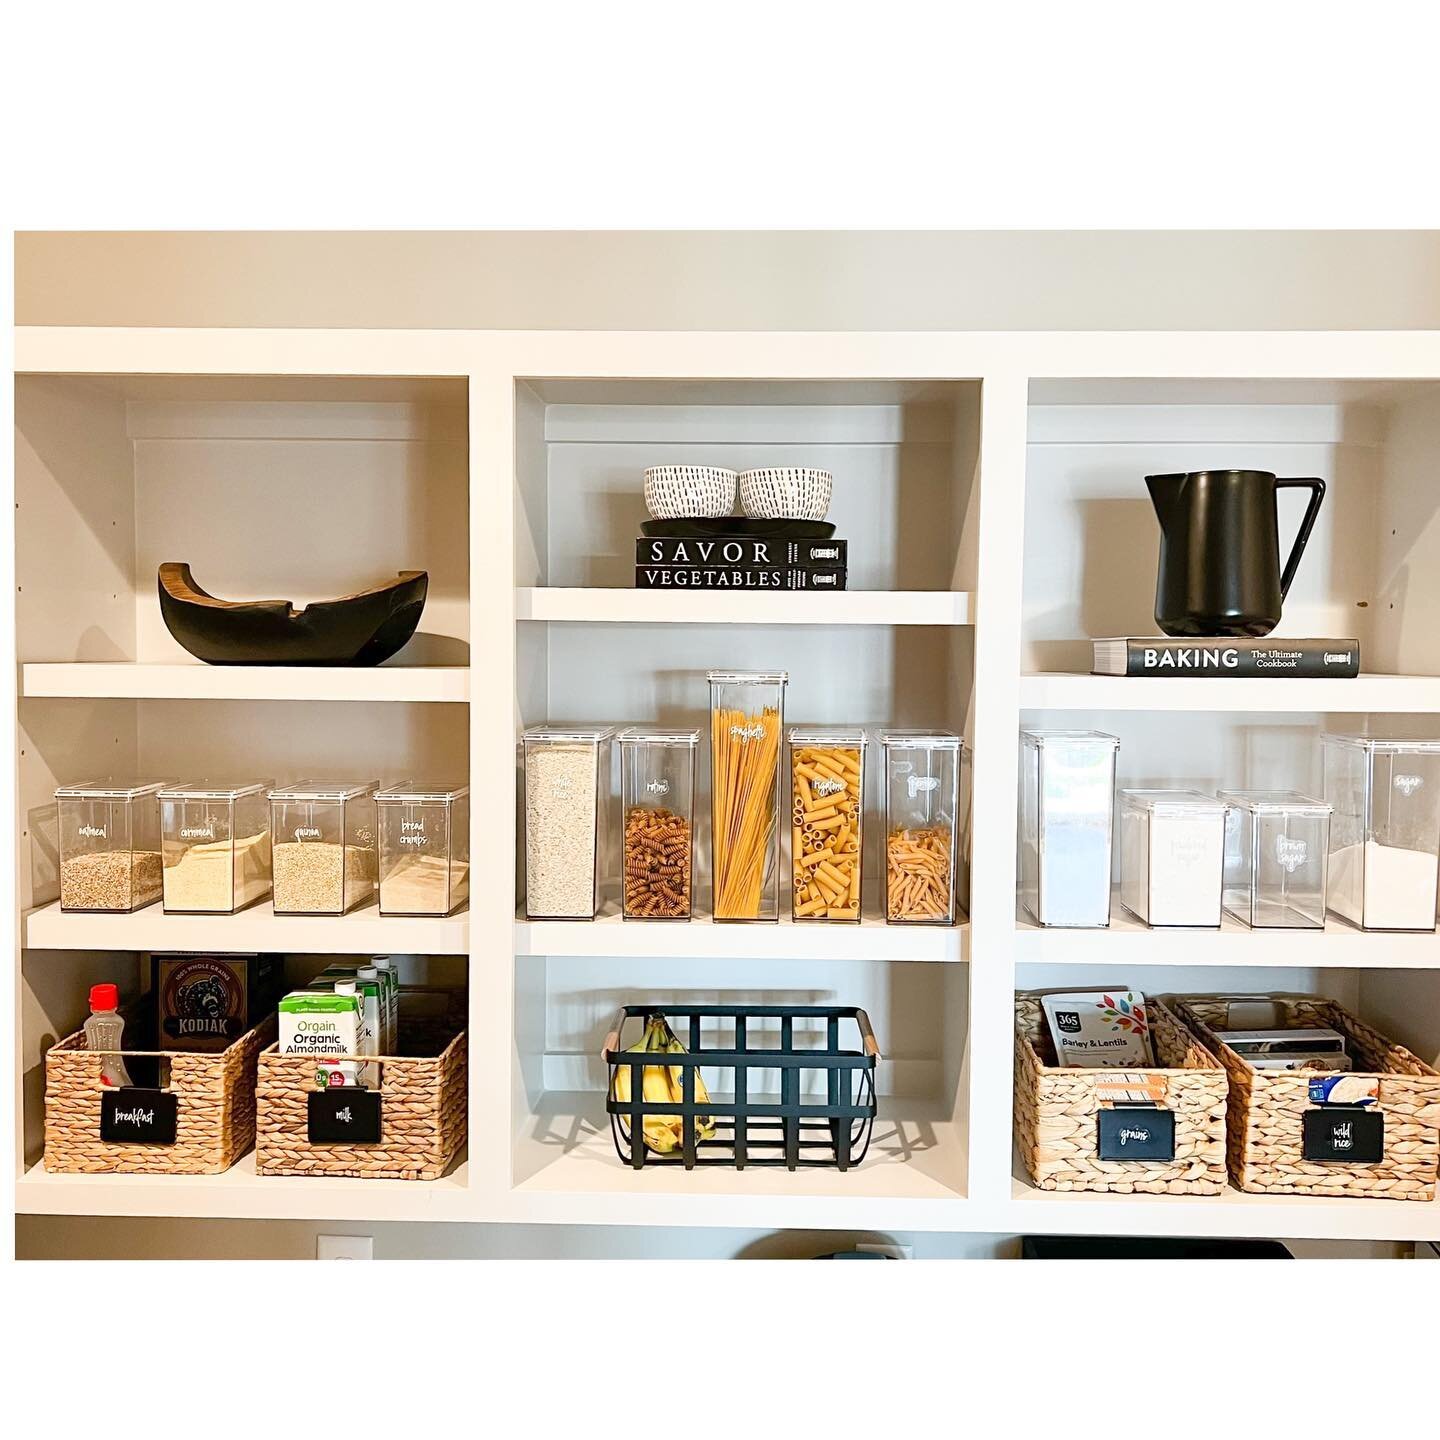 We are so obsessed with how this pantry turned out! 
.
Adding lots of drawers keeps things so much cleaner looking aesthetically, and we picked out the perfect decor and cookbooks to finish off it all off just perfectly☺️
.
Investing in organization 